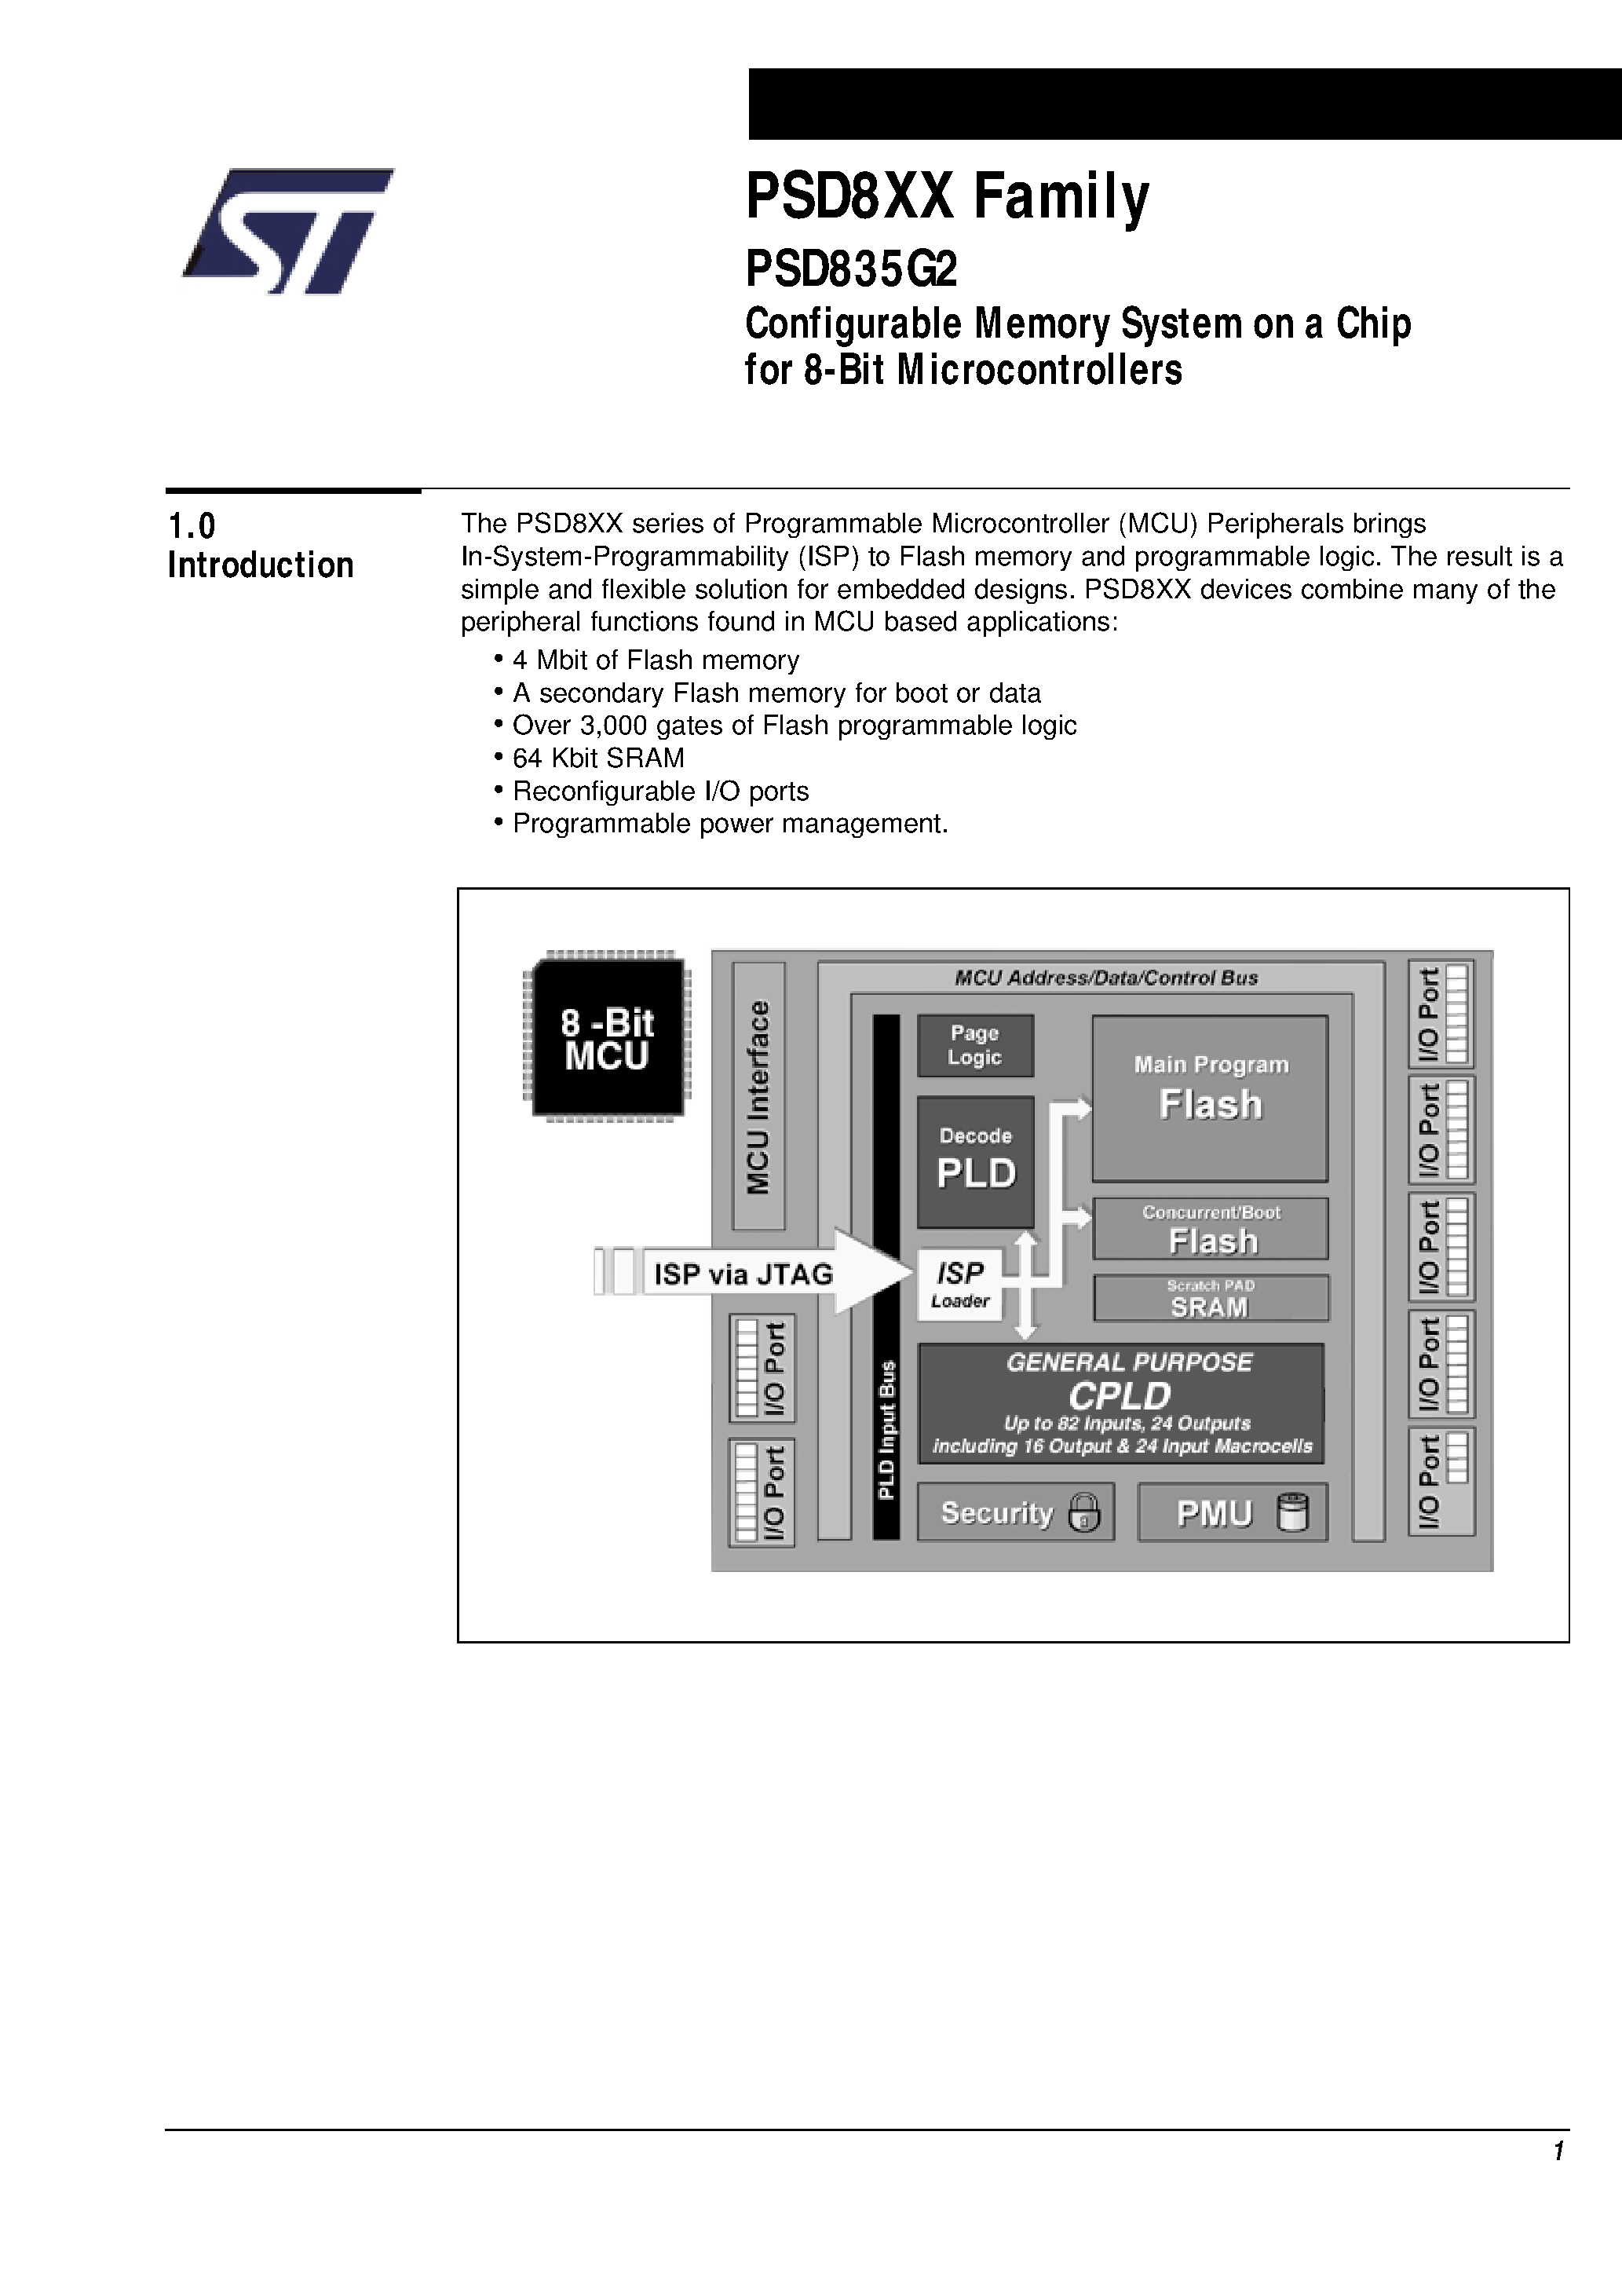 Datasheet PSD835F1-A-20MI - Configurable Memory System on a Chip for 8-Bit Microcontrollers page 2